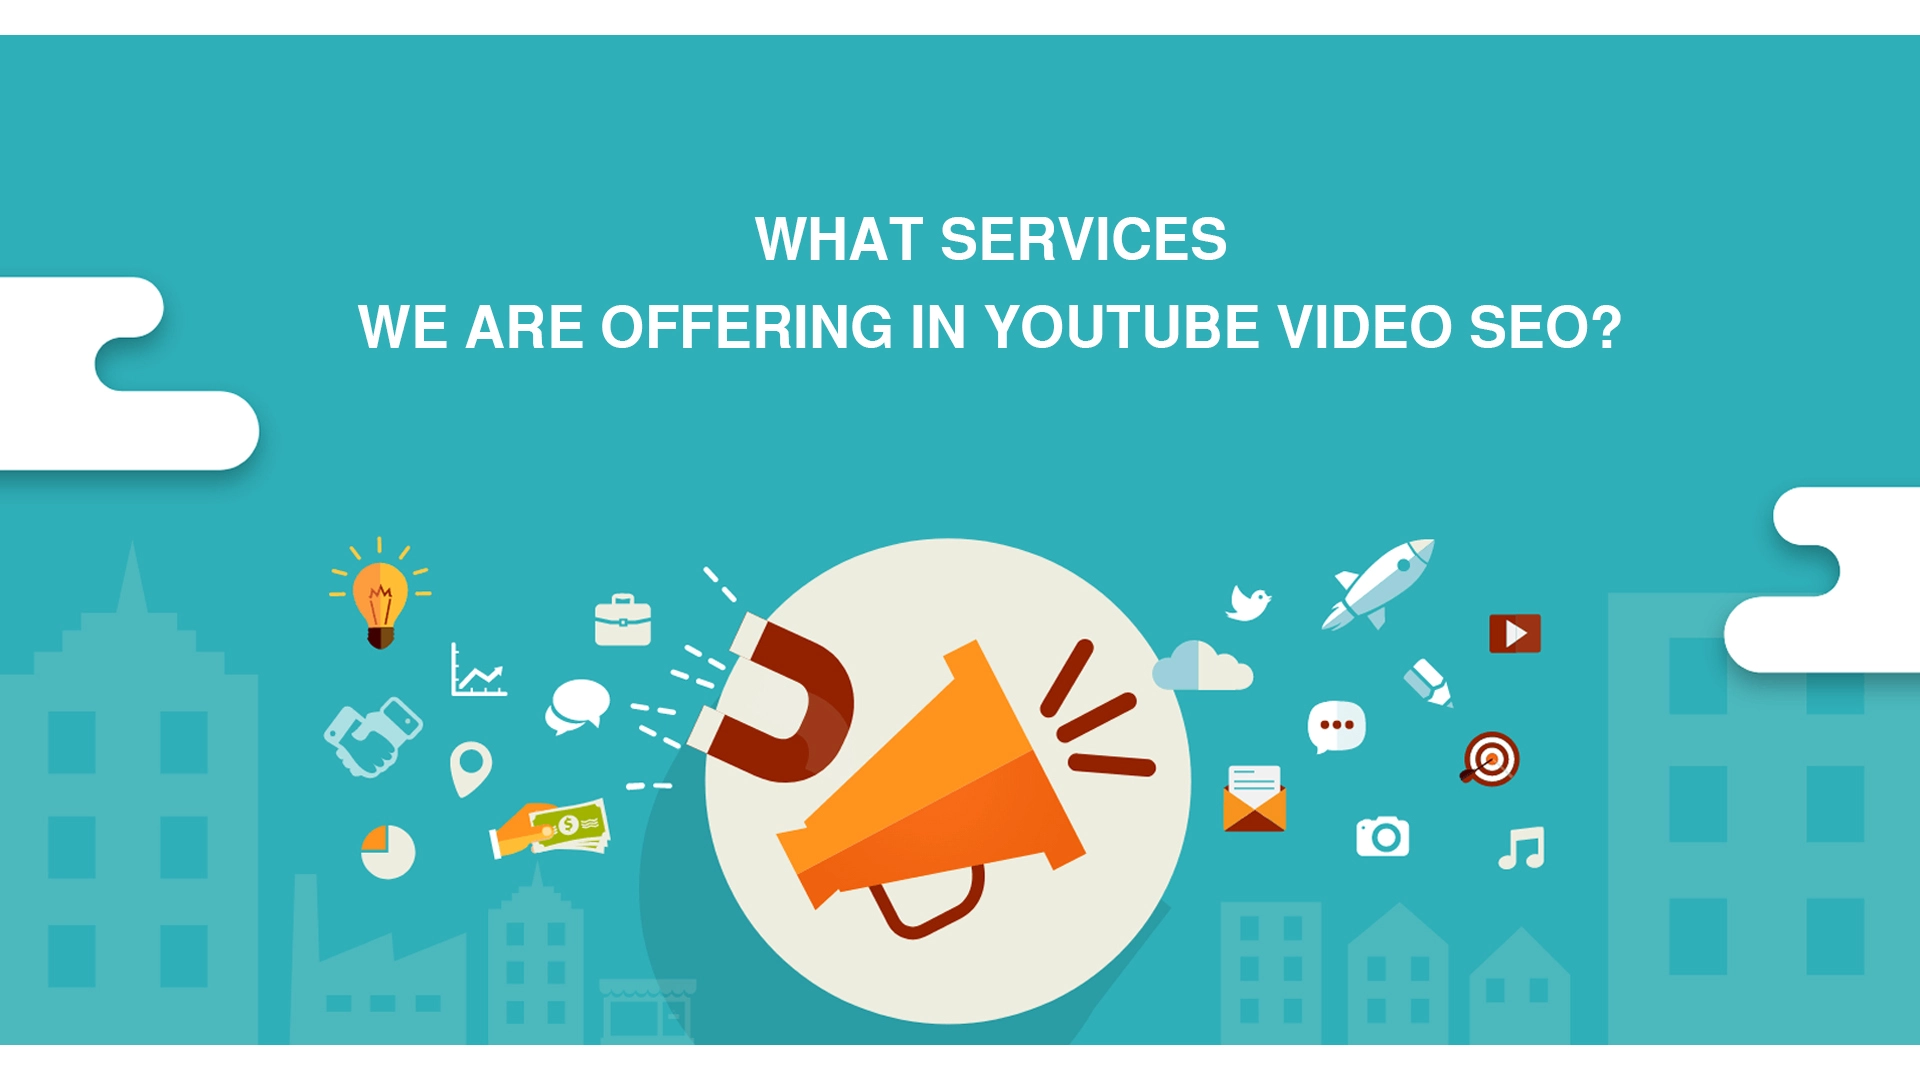 What services we are offering in YouTube video SEO?